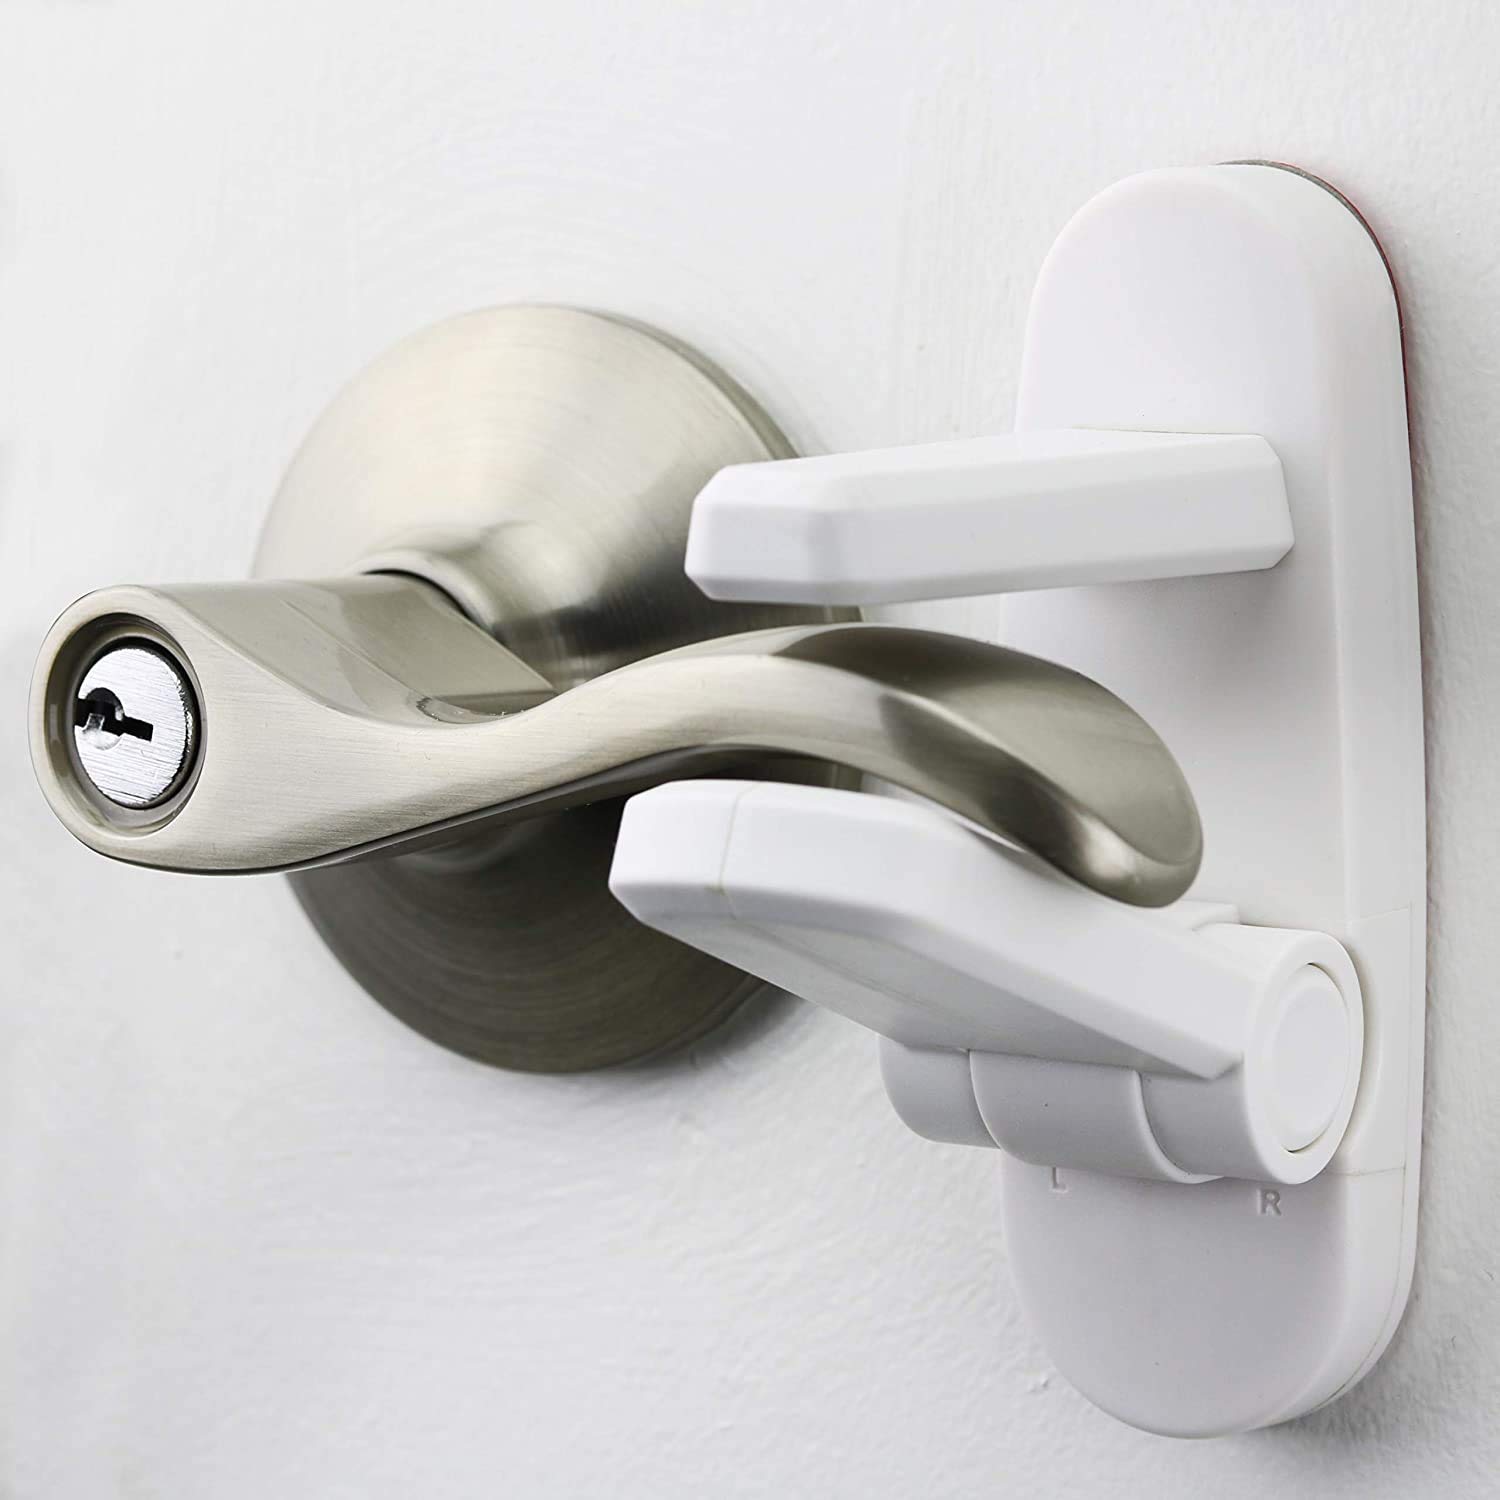 Baby Toilet Lock by Wappa Baby - Ideal Baby Proof Toilet Lid Lock with Arm